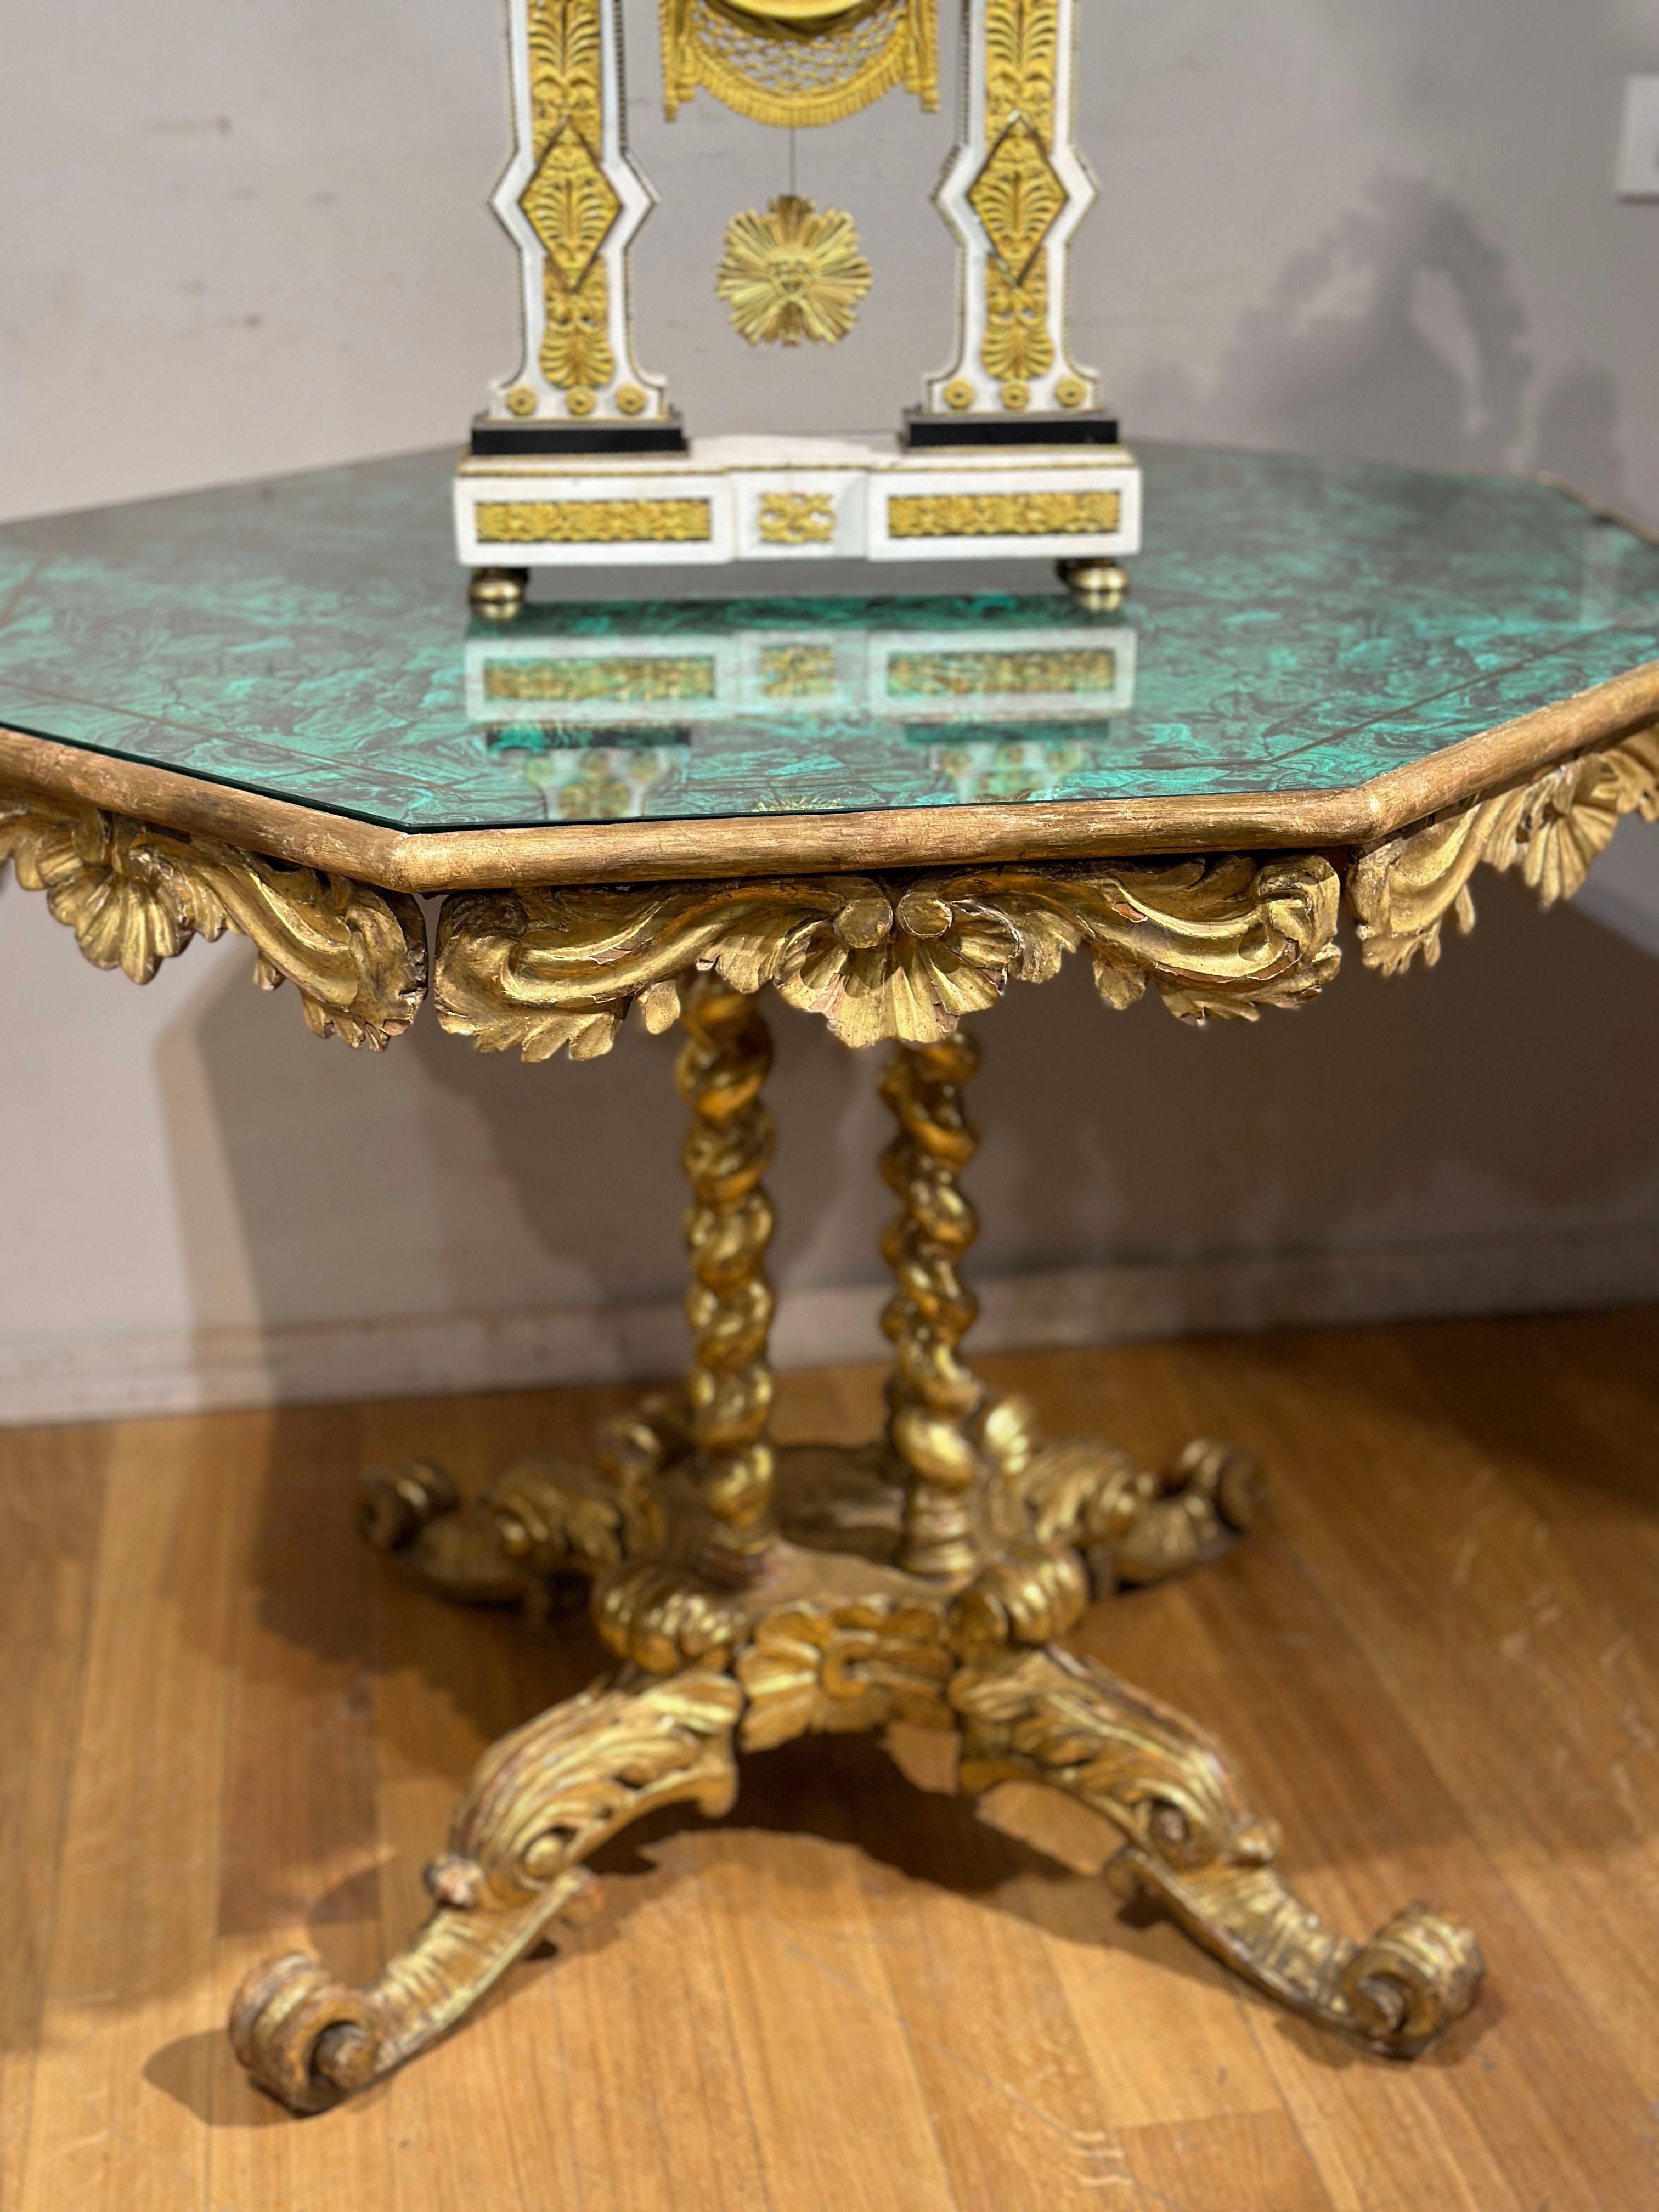 EARLY 19th CENTURY GILDED WOOD TABLE WITH SIMILAR MALACHITE FABRIC For Sale 4